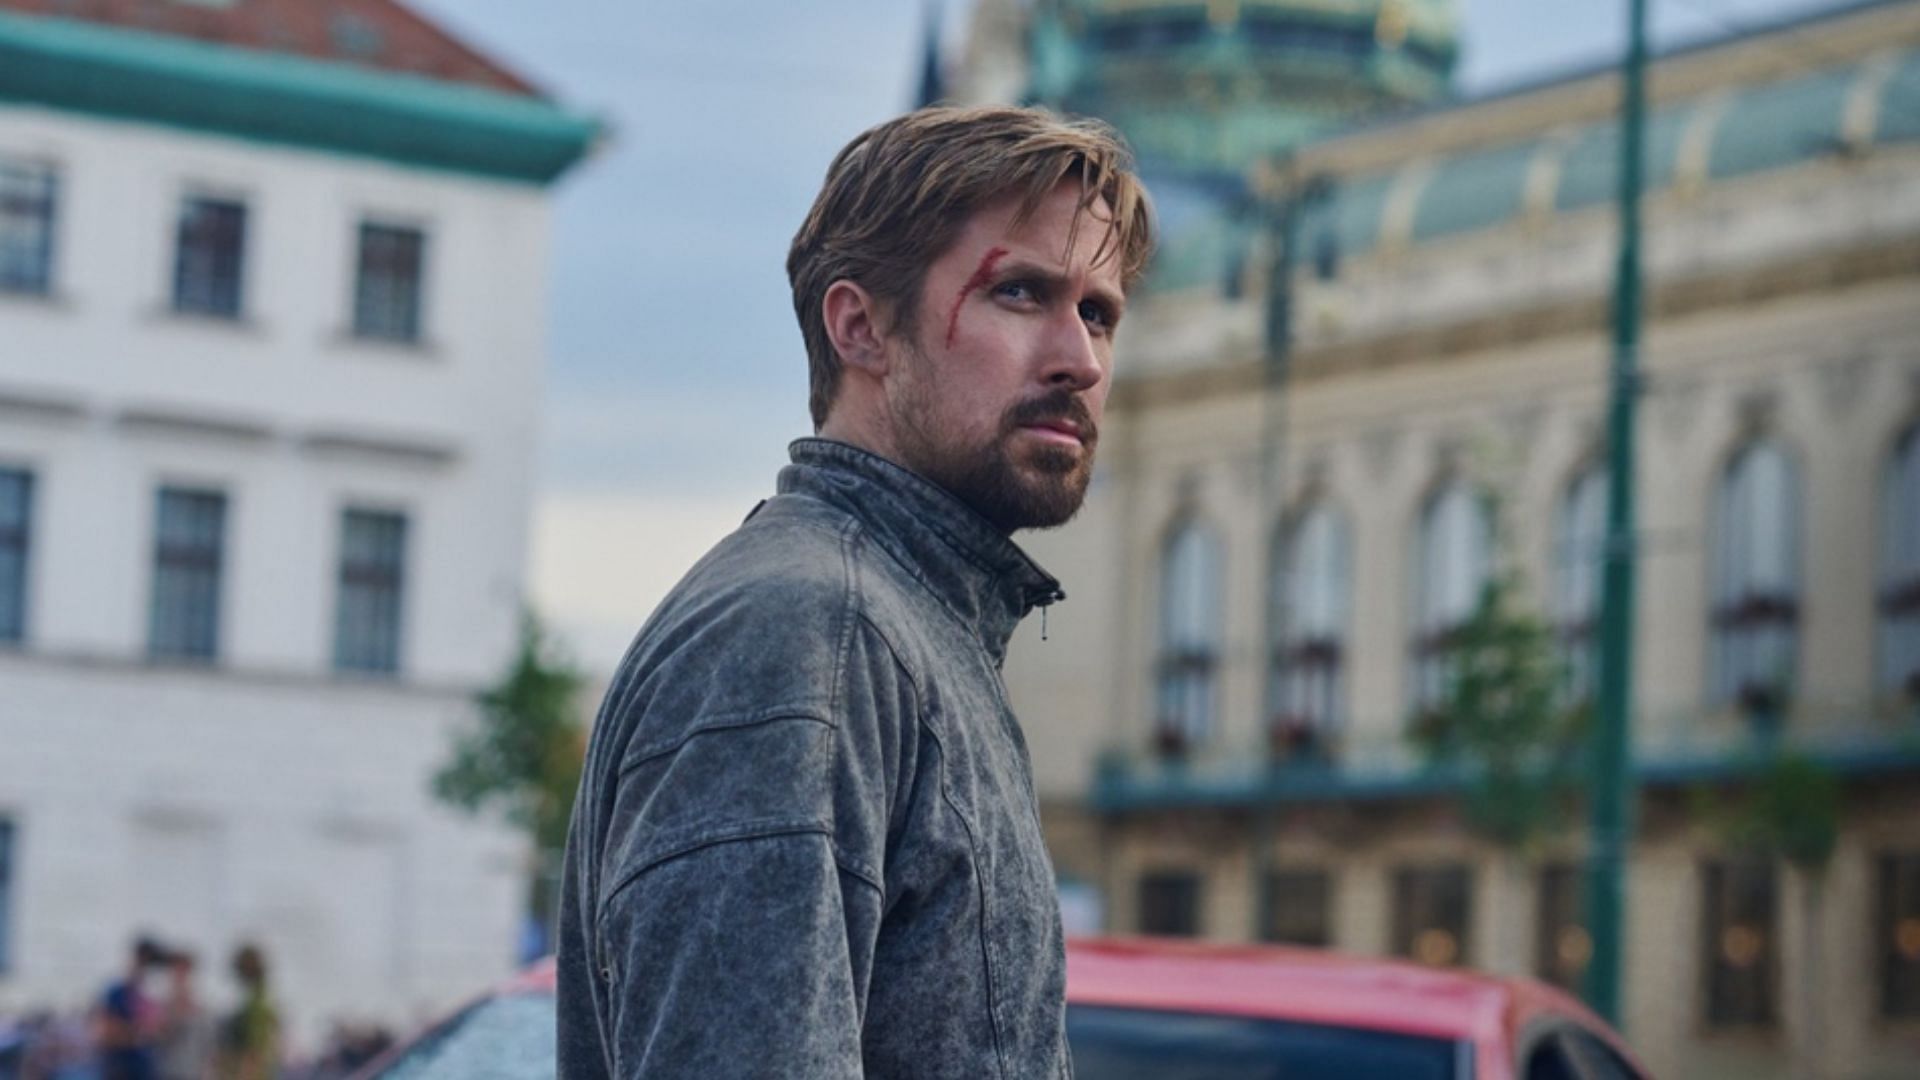 Ryan Gosling in The Gray Man (Image via Rotten Tomatoes)